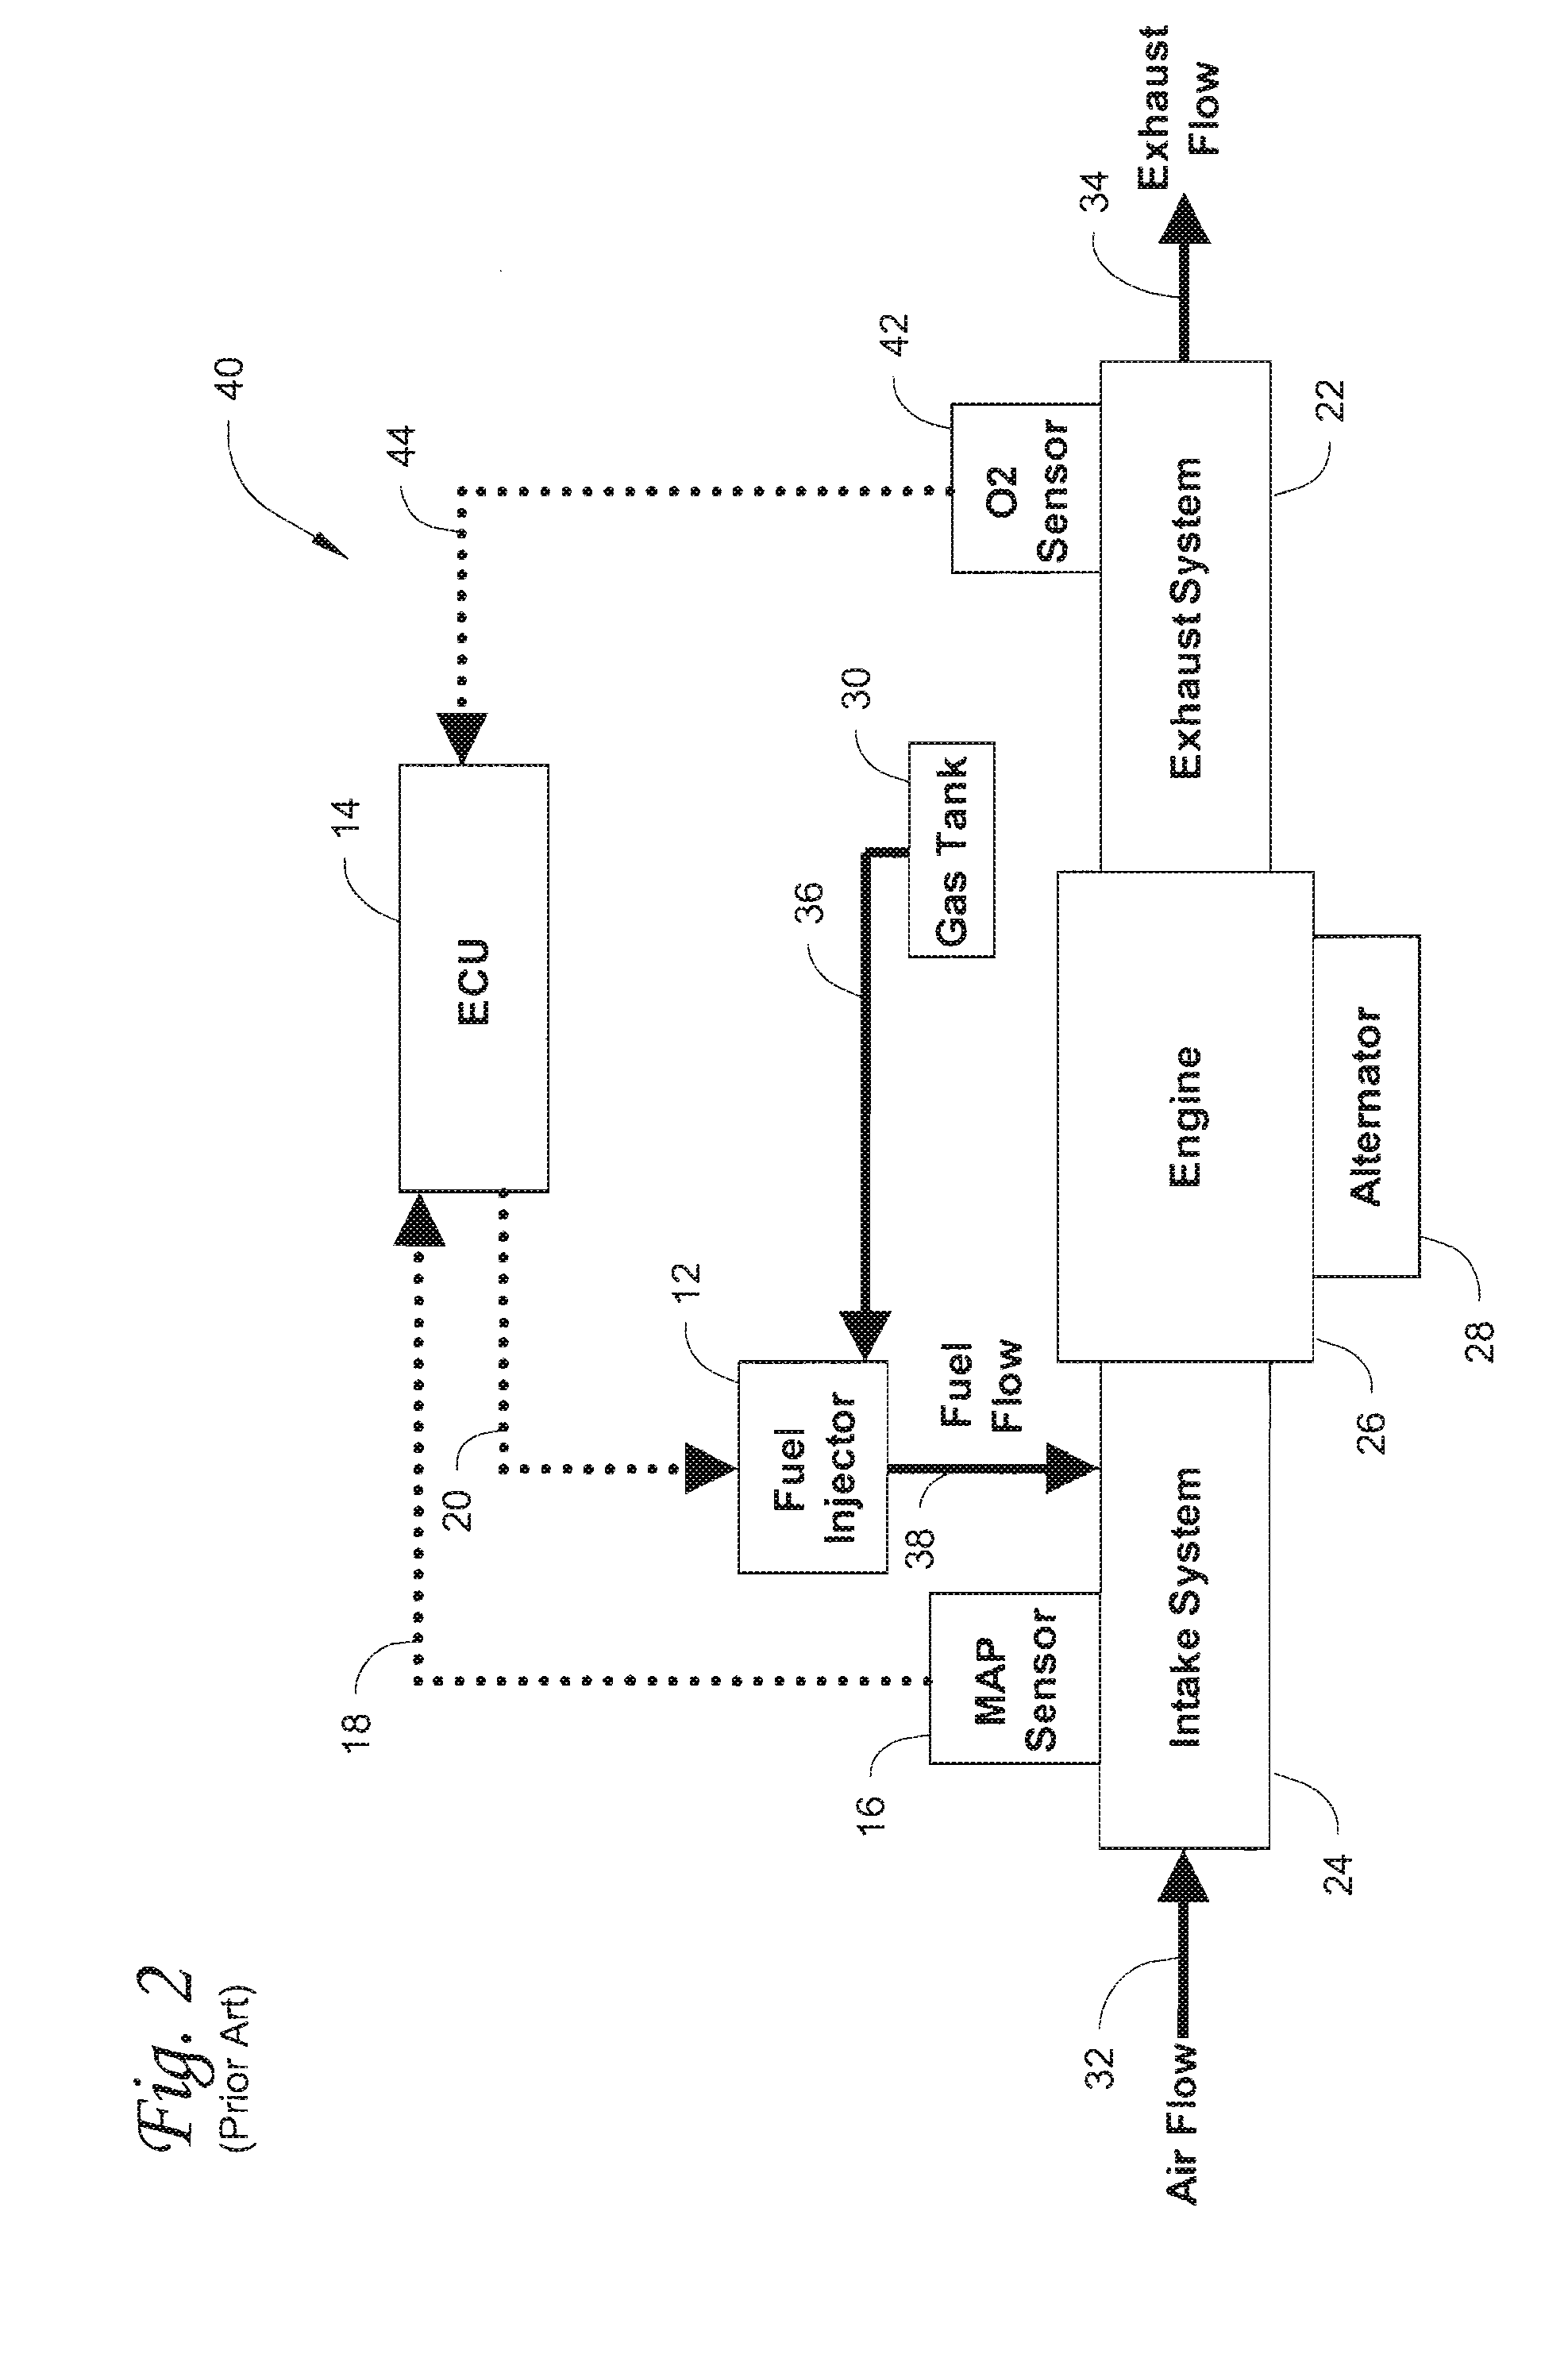 Genset engine with an electronic fuel injection system integrating electrical sensing and crank position sensing